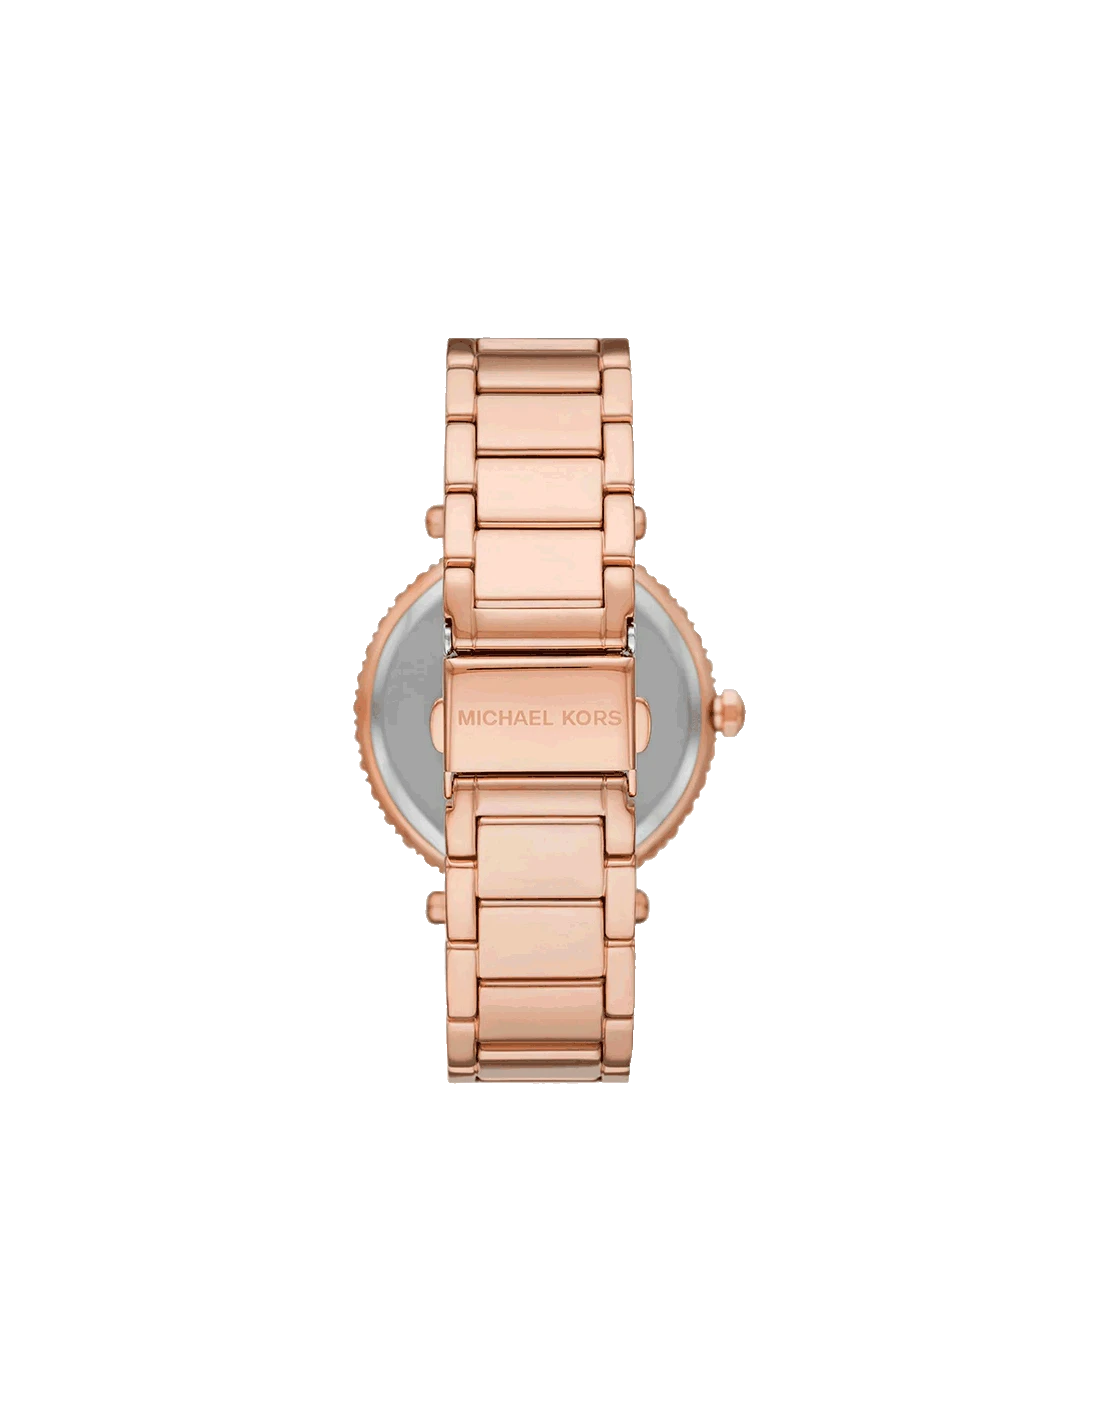 Michael Kors Parker Three-Hand Rose Gold-Tone Stainless Steel Watch - Kamal Watch Company